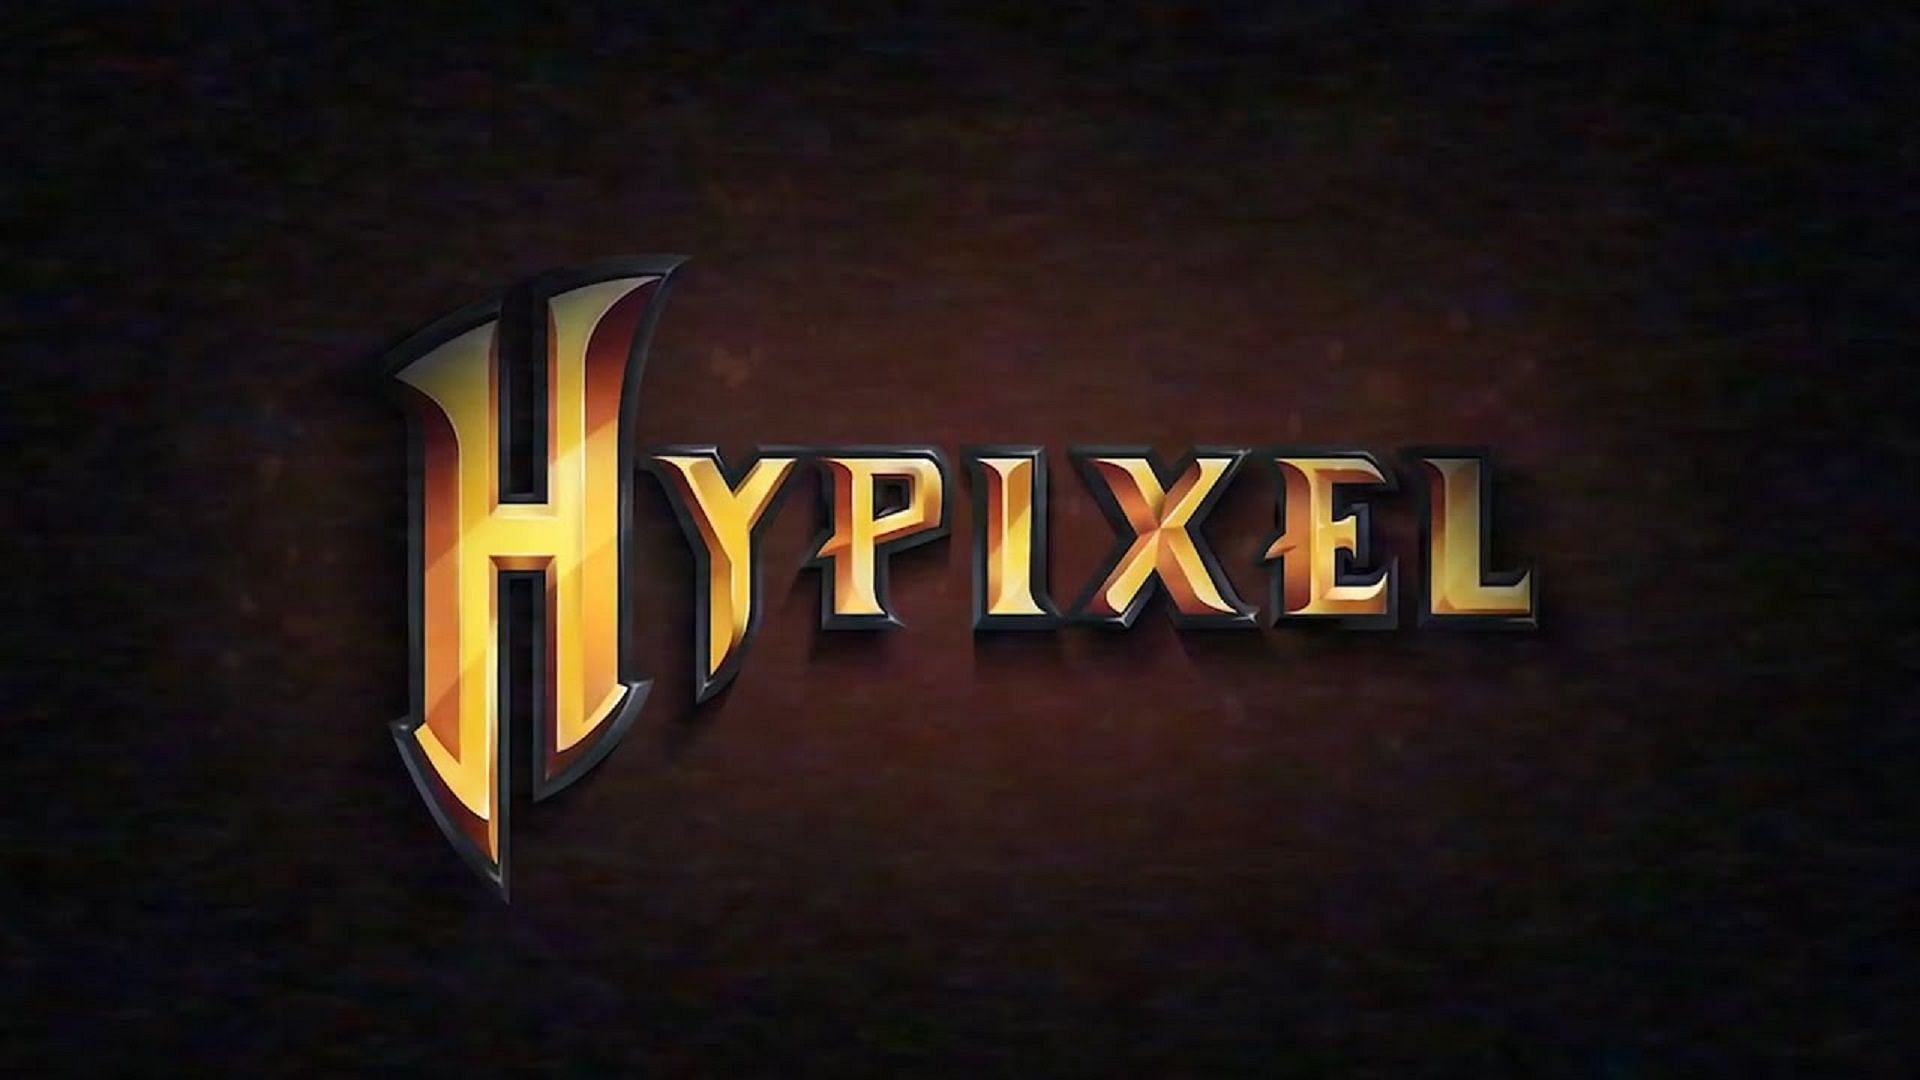 The official Hypixel logo (Image via Hypixel.net)